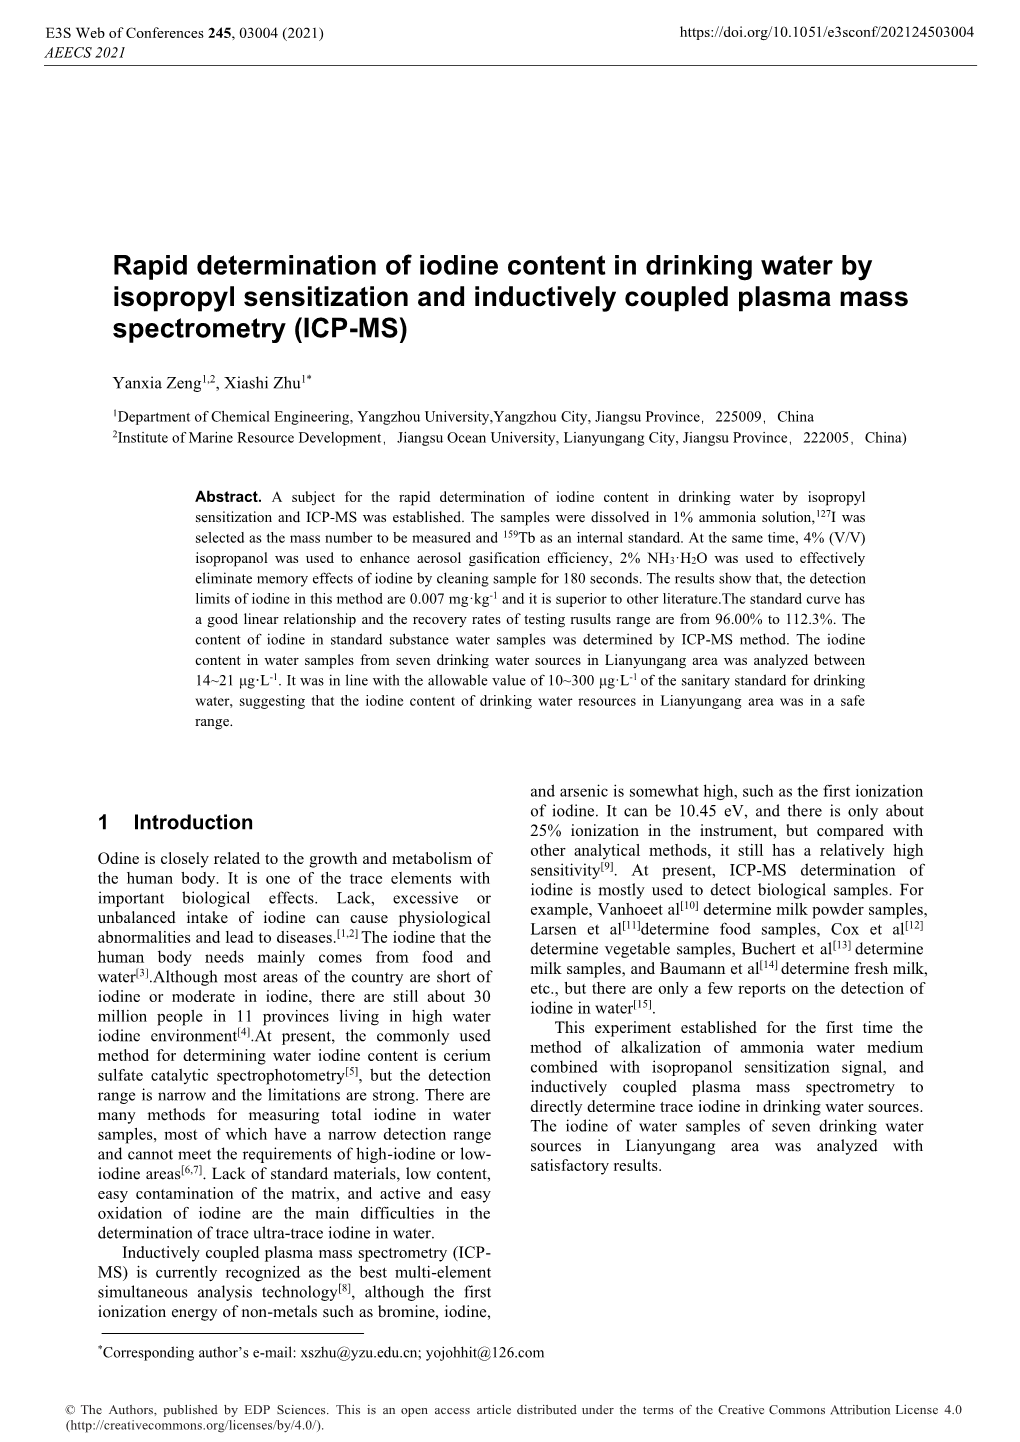 Rapid Determination of Iodine Content in Drinking Water by Isopropyl Sensitization and Inductively Coupled Plasma Mass Spectrometry (ICP-MS)